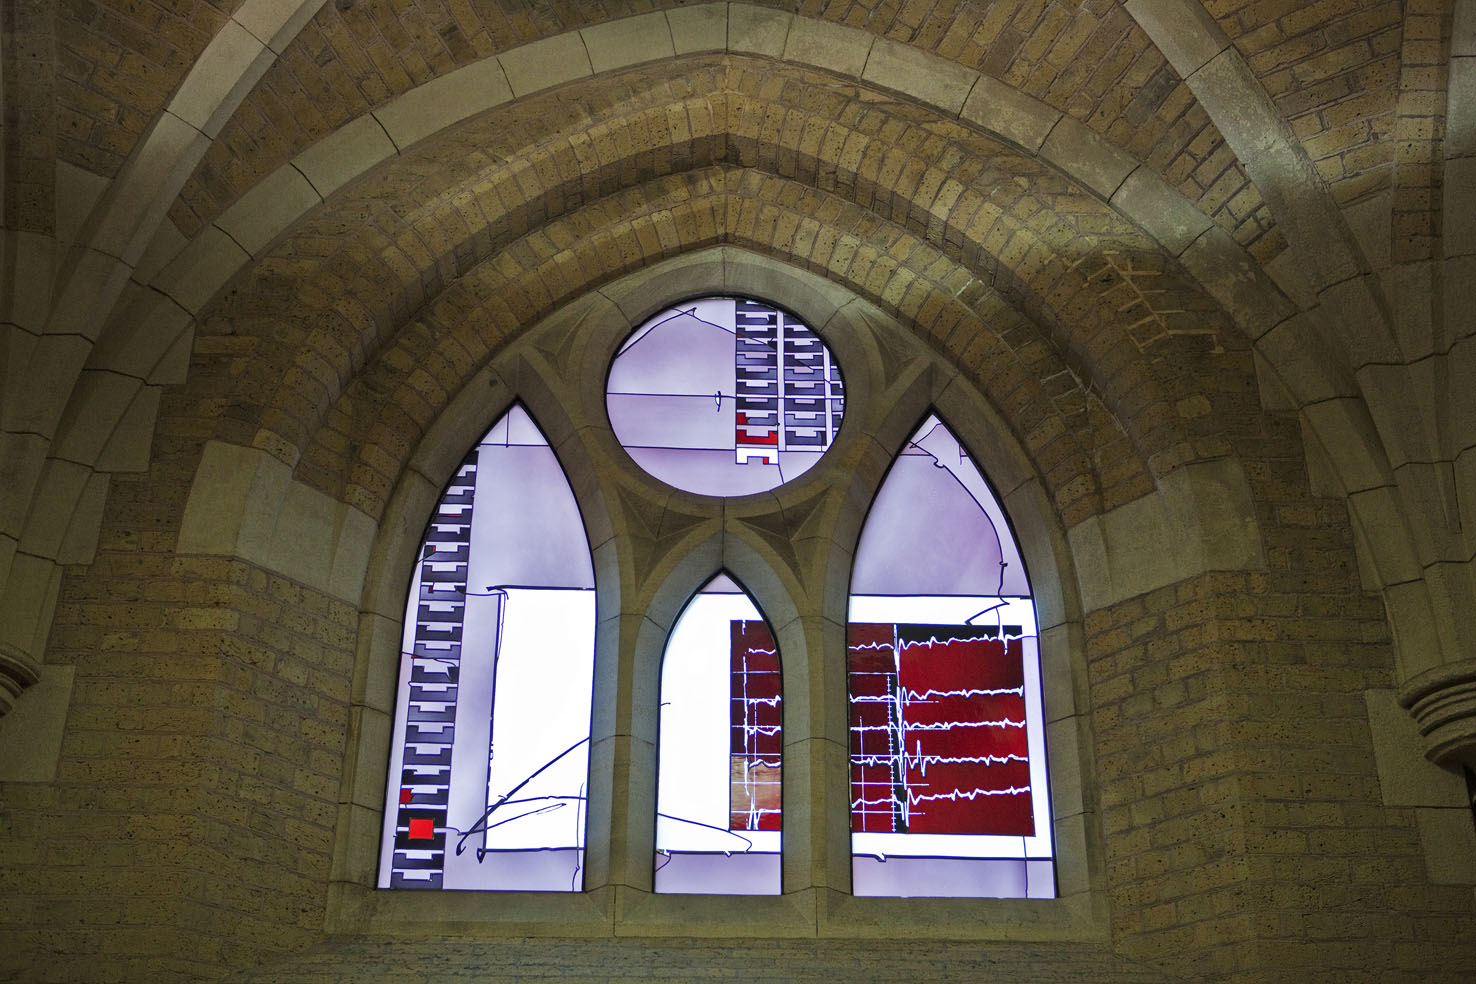 A photograph of the Medical Diagnosis Window at Whitechapel Library